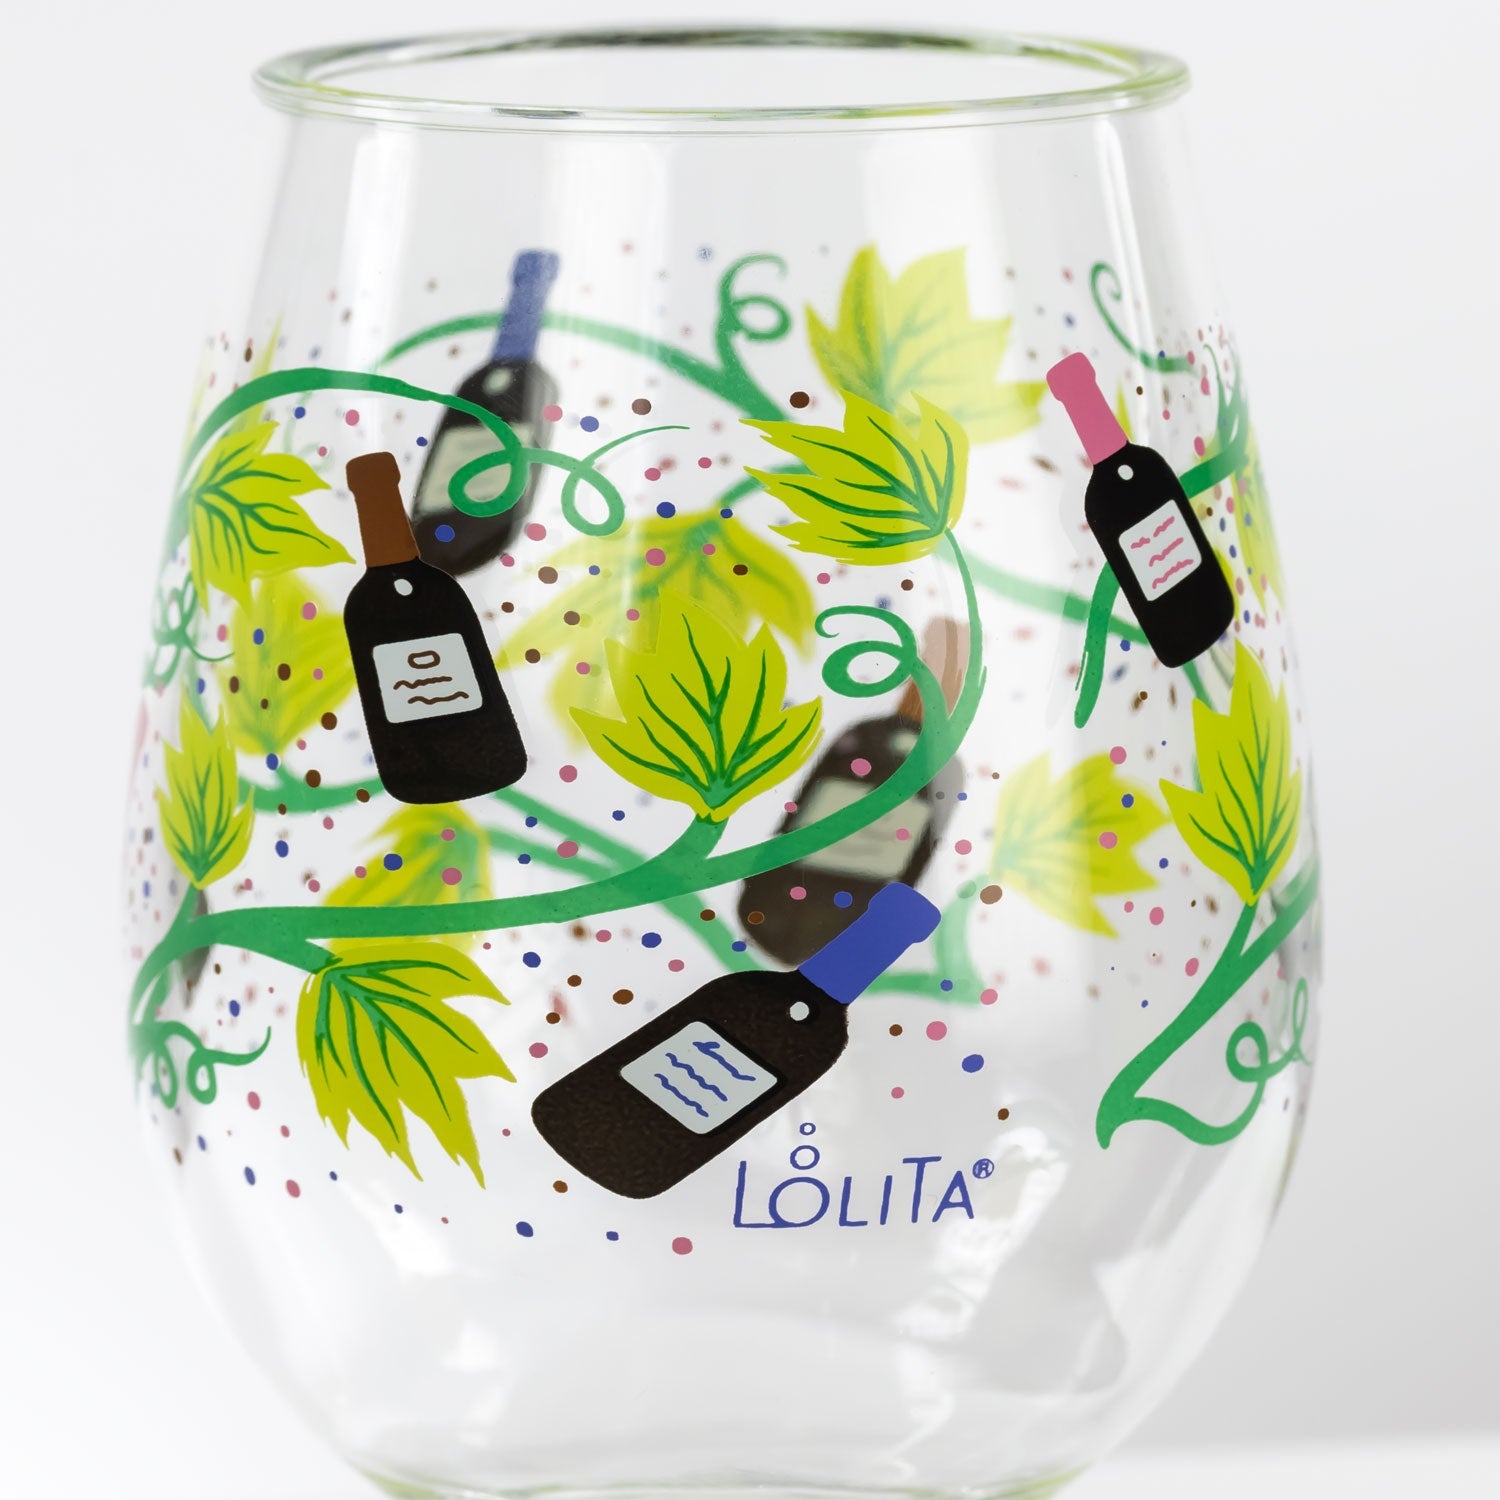 Party To Go by Lolita Wine Tasting 15oz Acrylic Stemless Wine Glasses